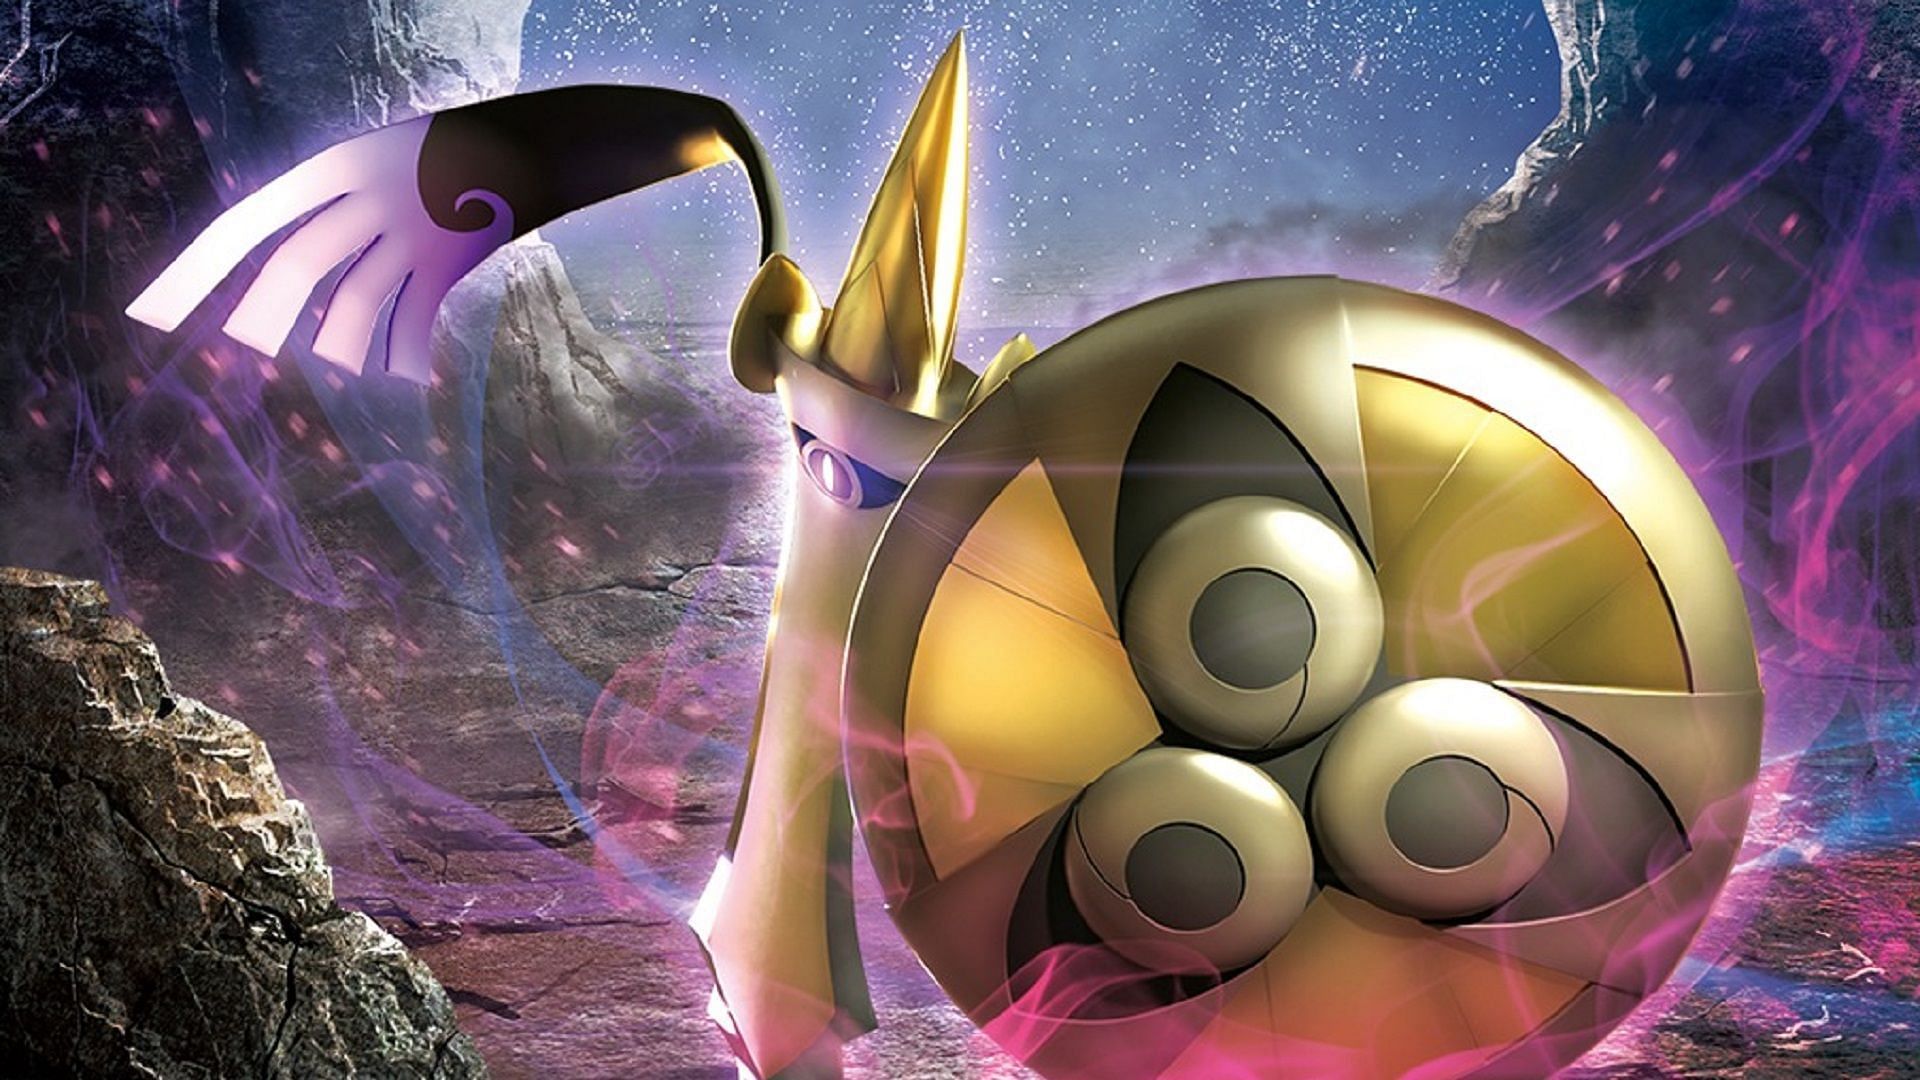 What made Aegislash incredibly powerful in competitive battles in Generations VI-VII? (Image via The Pokemon Company)